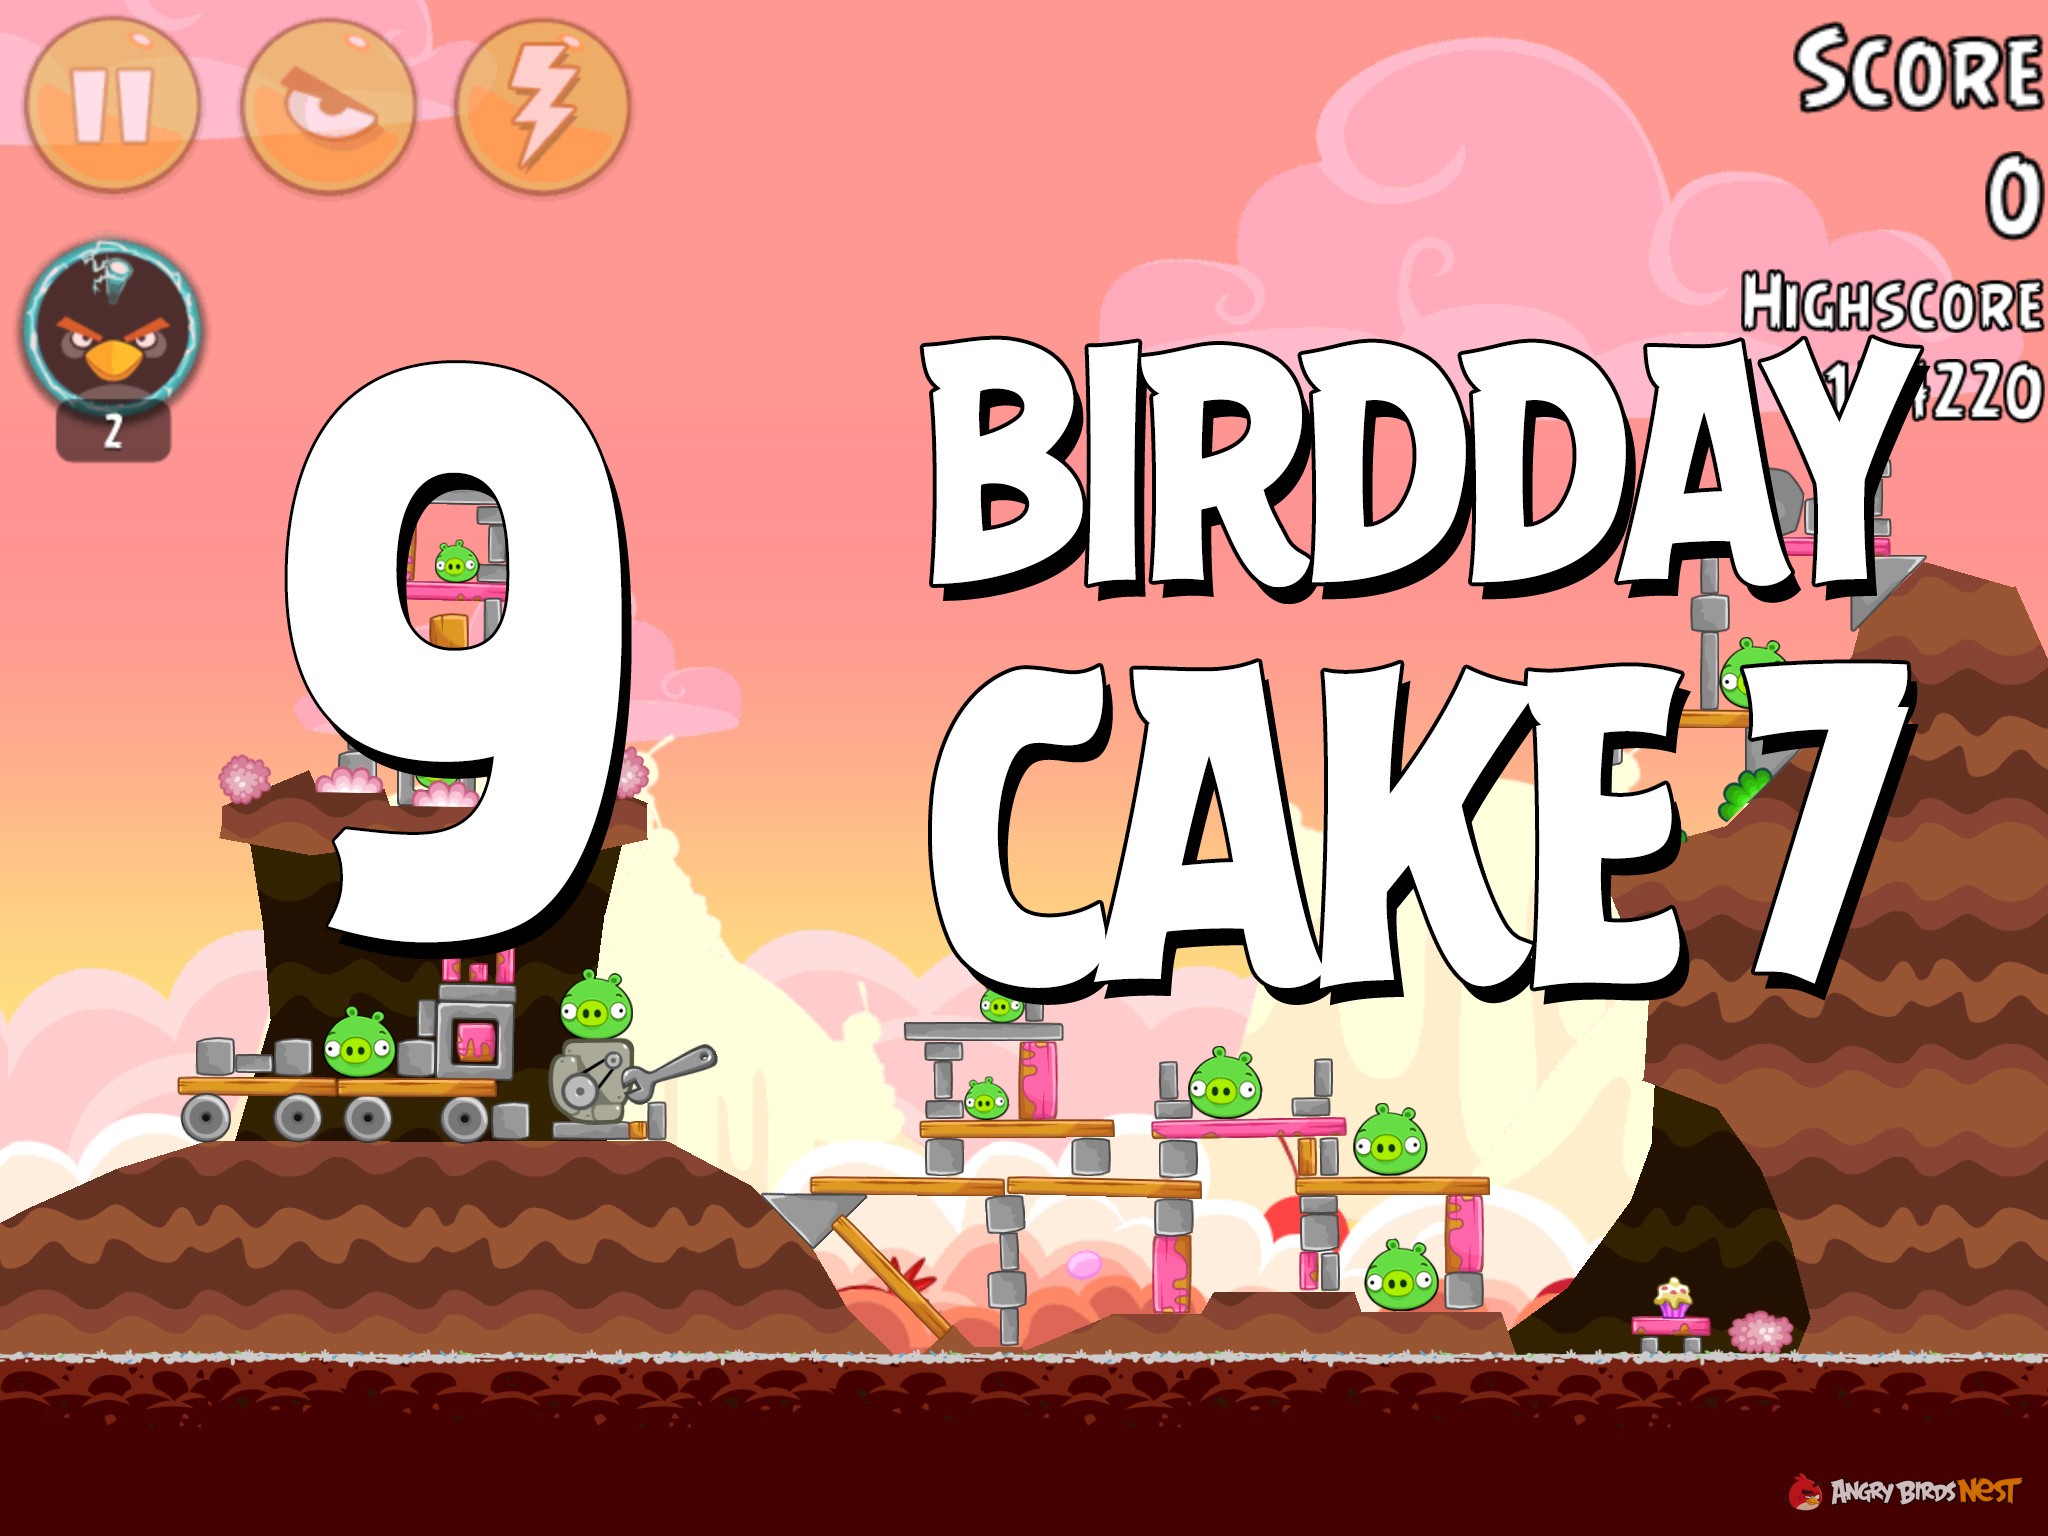 Angry-Birds-Birdday-Party-Cake-7-Level-9